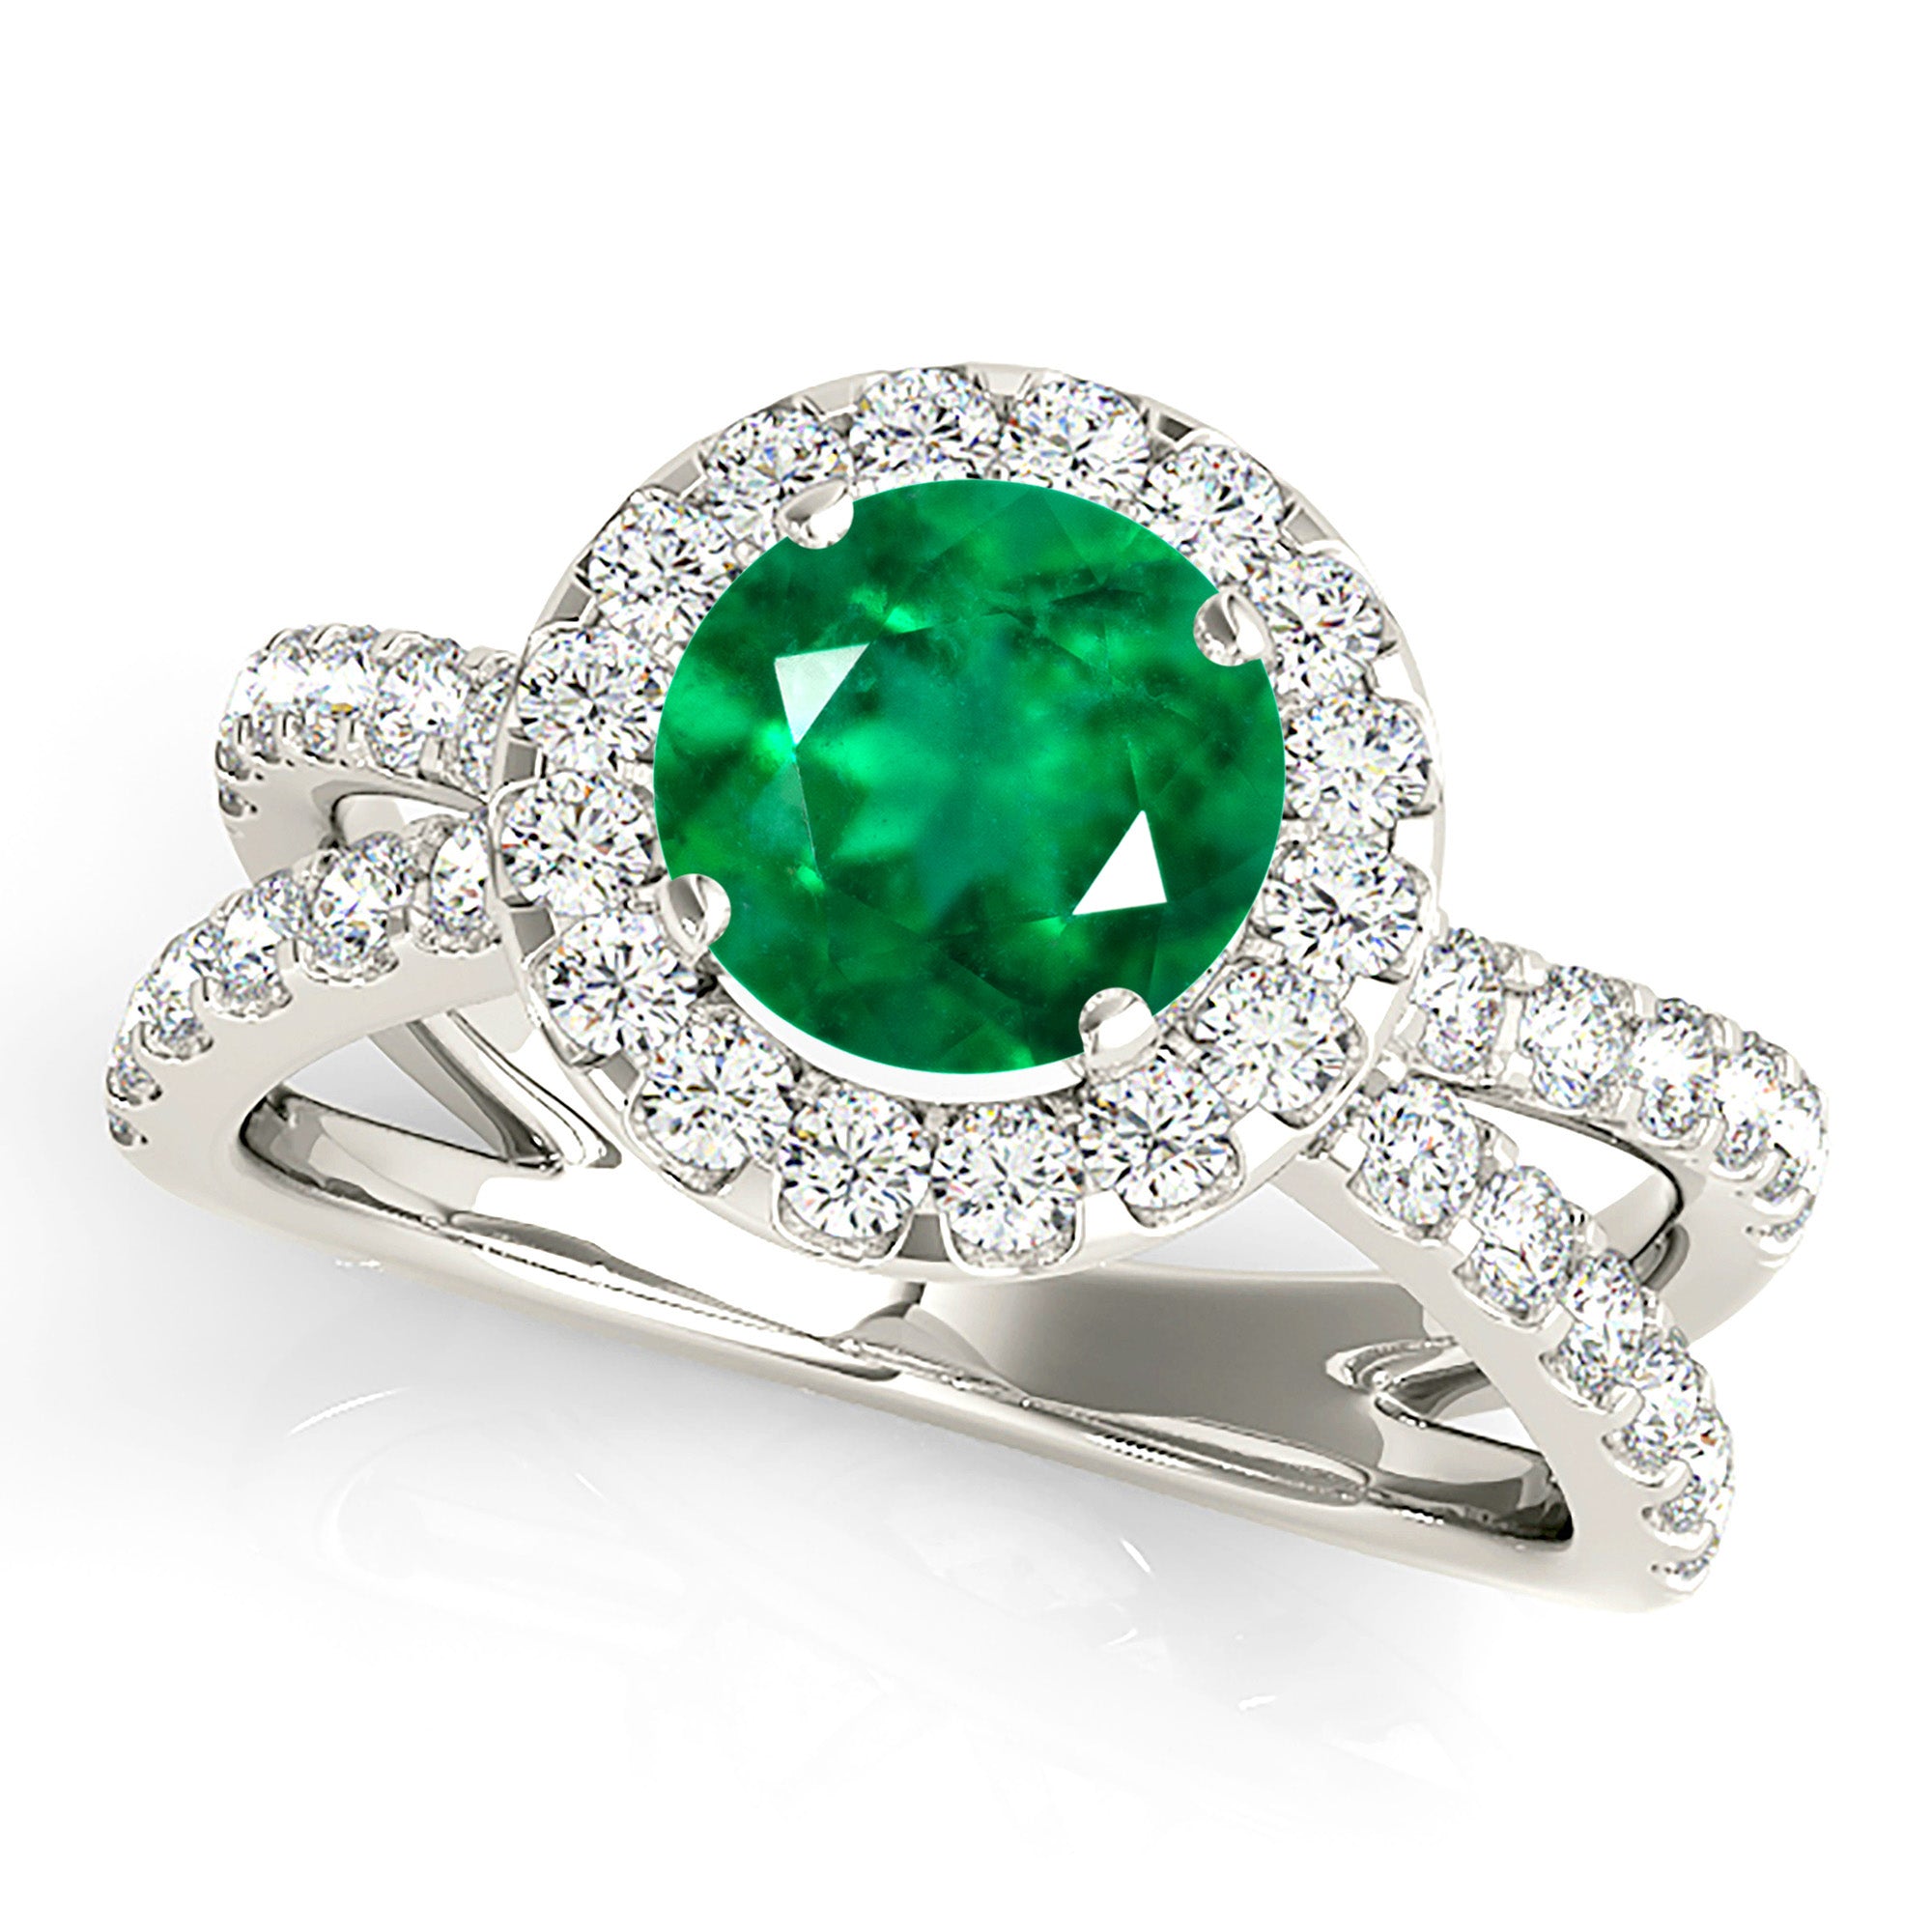 1.75 ct. Genuine Emerald Halo Criss Cross Ring with 0.90 ctw. Side Diamonds-in 14K/18K White, Yellow, Rose Gold and Platinum - Christmas Jewelry Gift -VIRABYANI